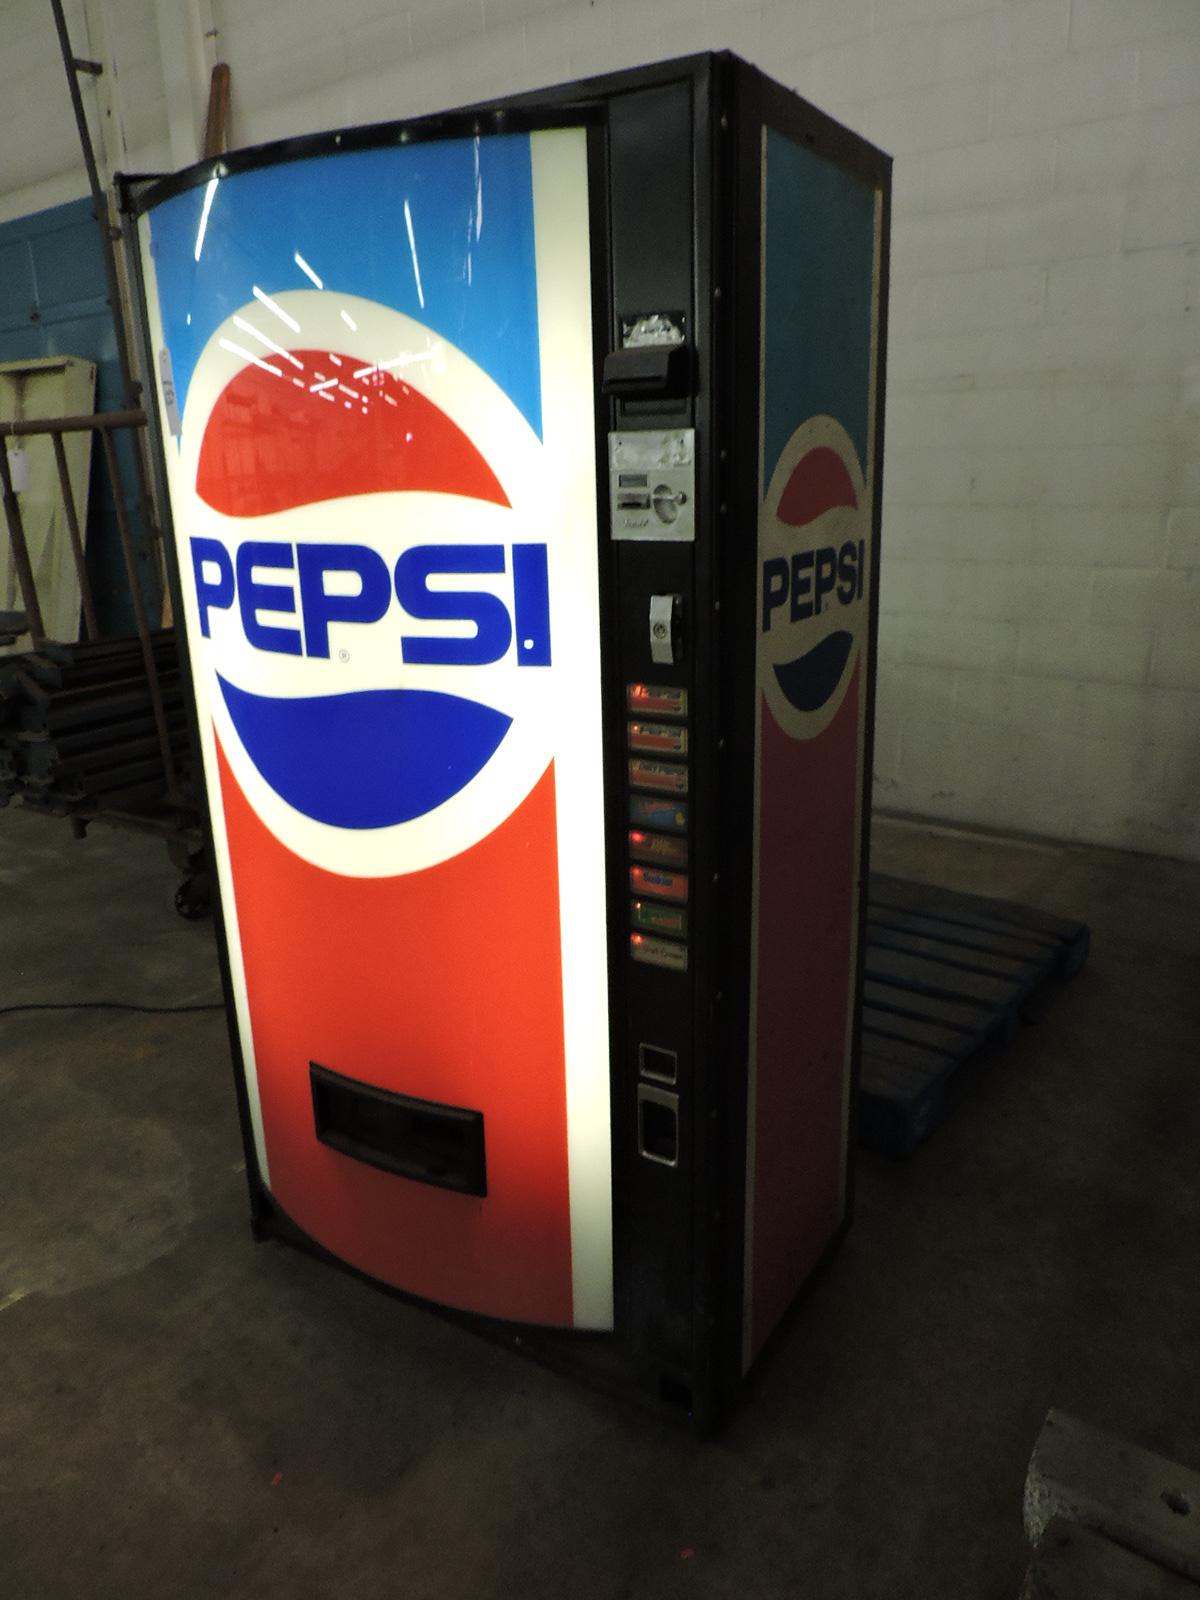 PEPSI Branded Retail Soda Machine - Appears Fully Functional